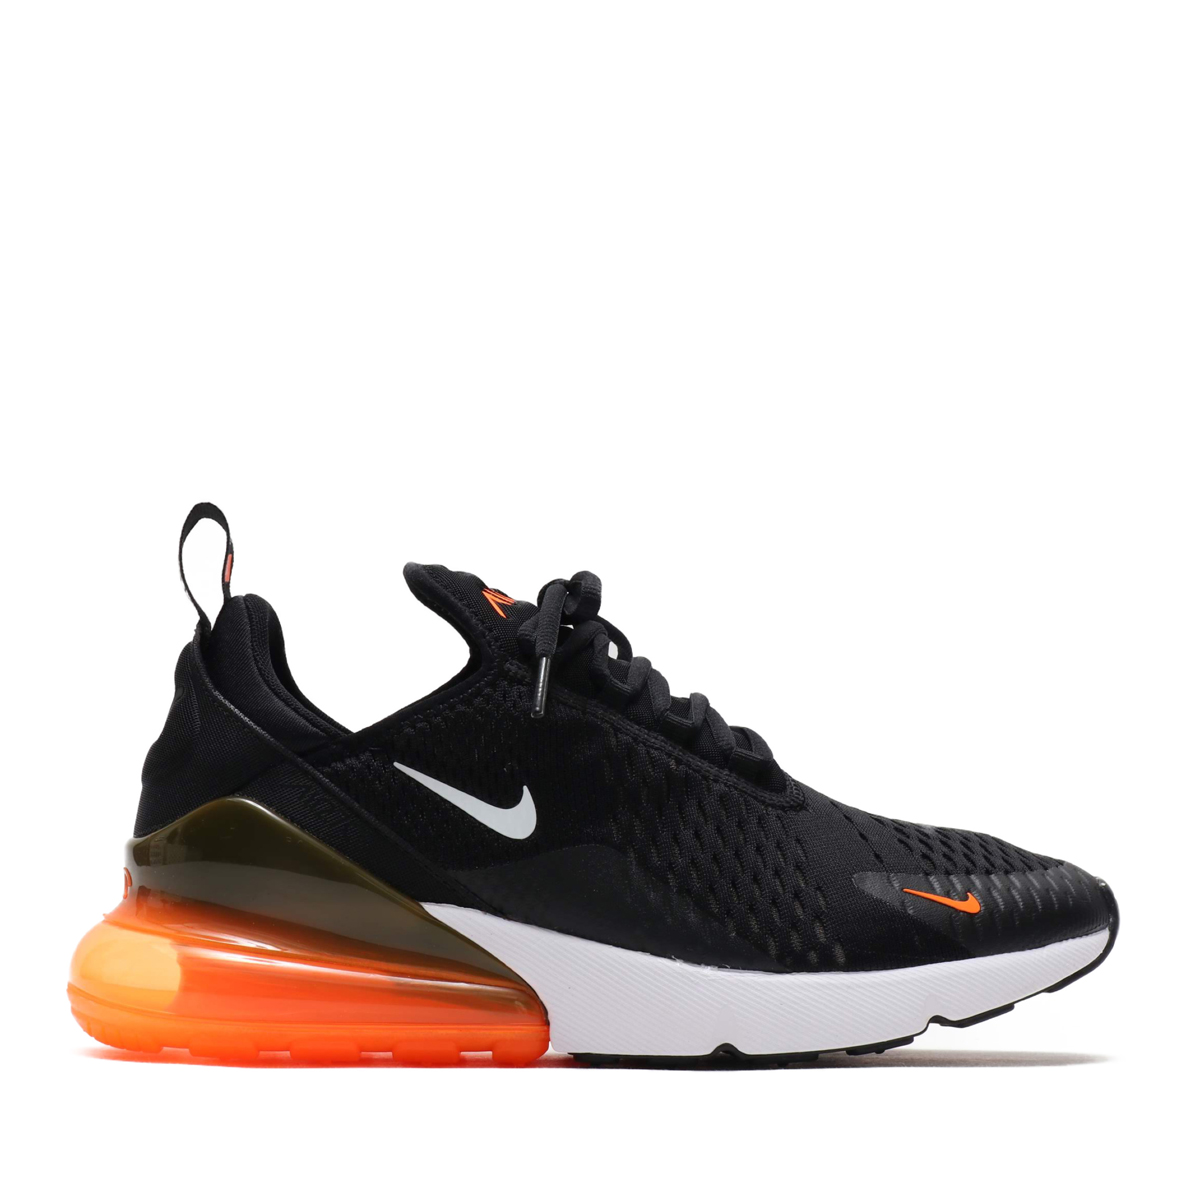 AIR MAX 270 JUST DO IT